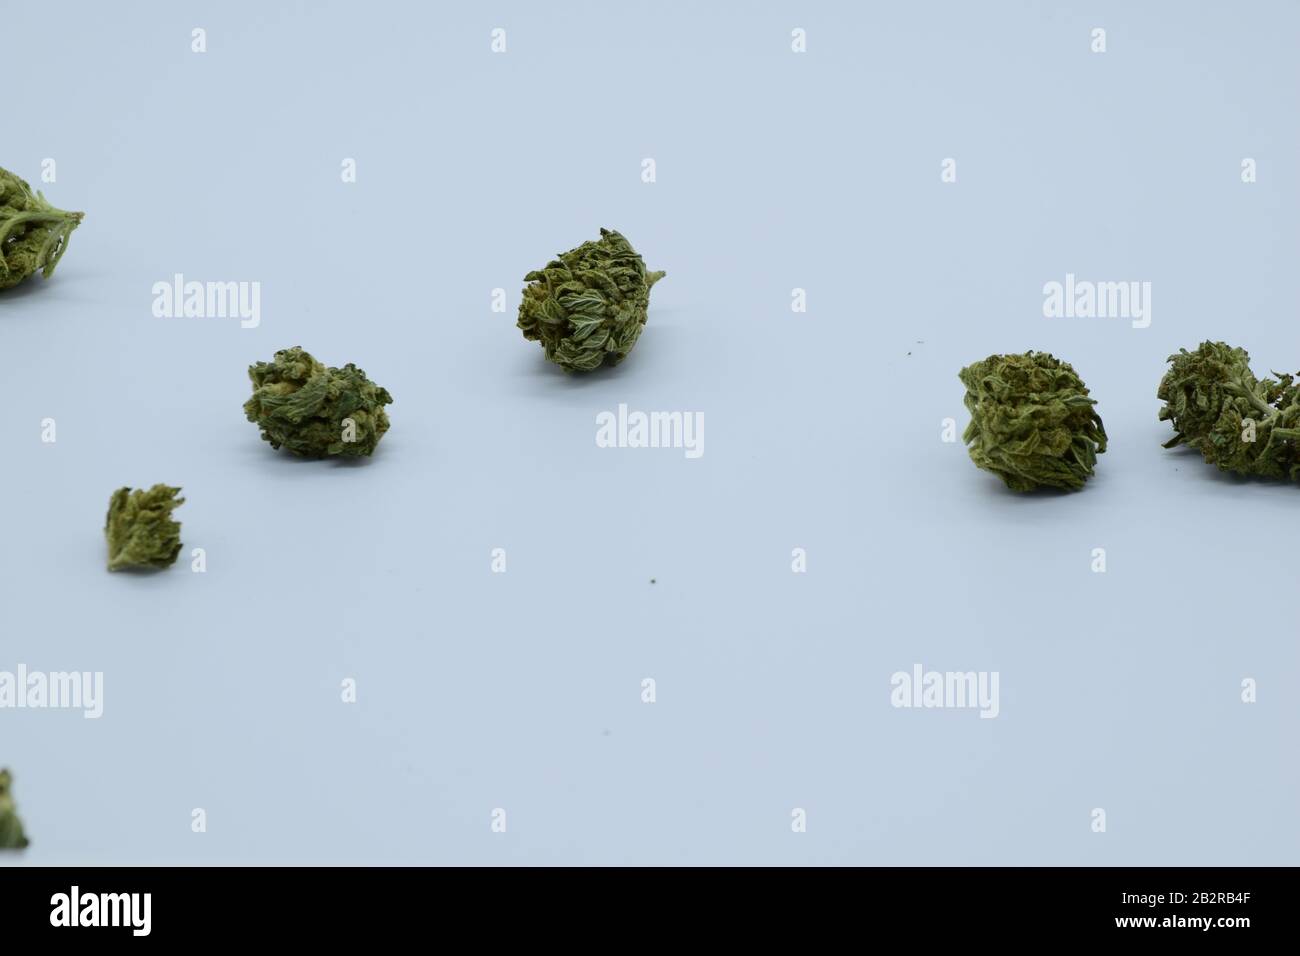 Close Up Of Dense Marijuana Buds With Trichomes Against White Background Stock Photo